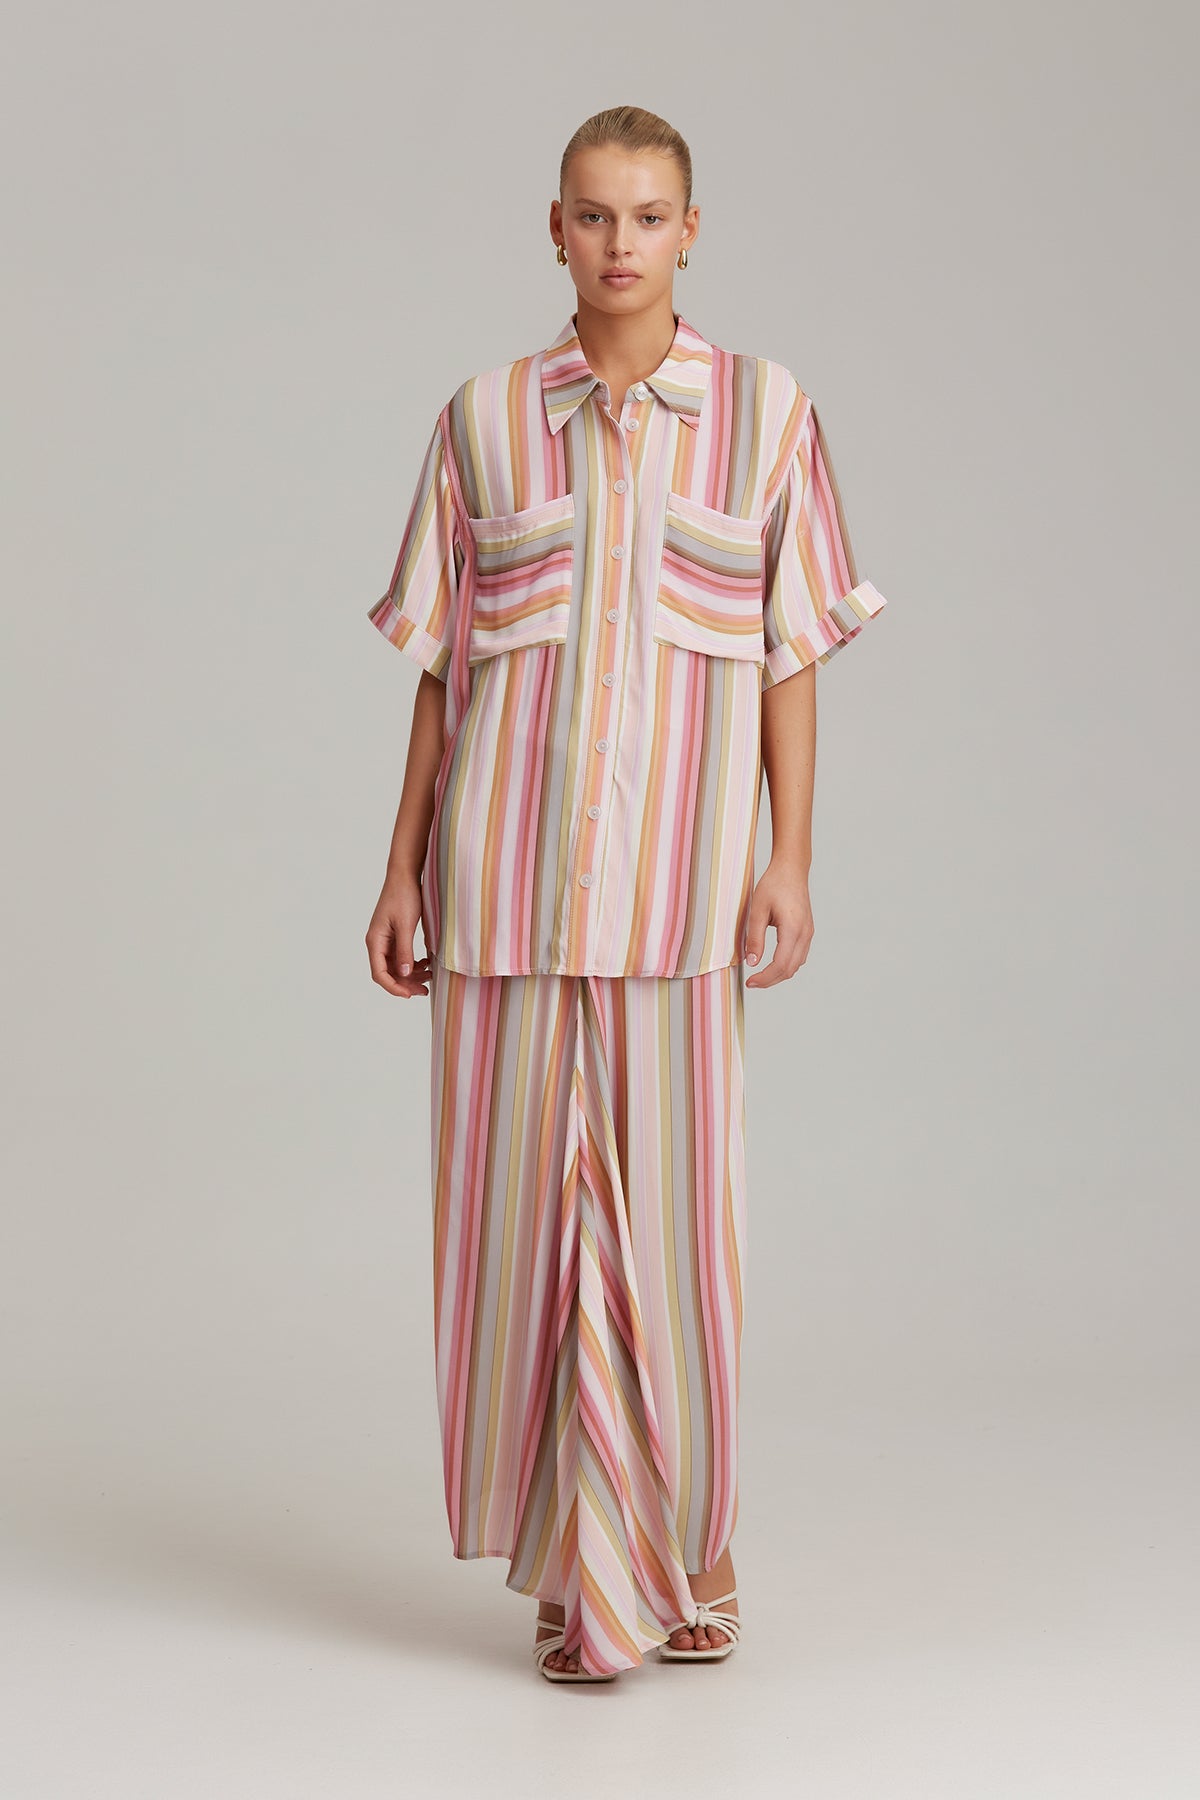 C/MEO Collective - Sincerely Shirt - Soft Stripe